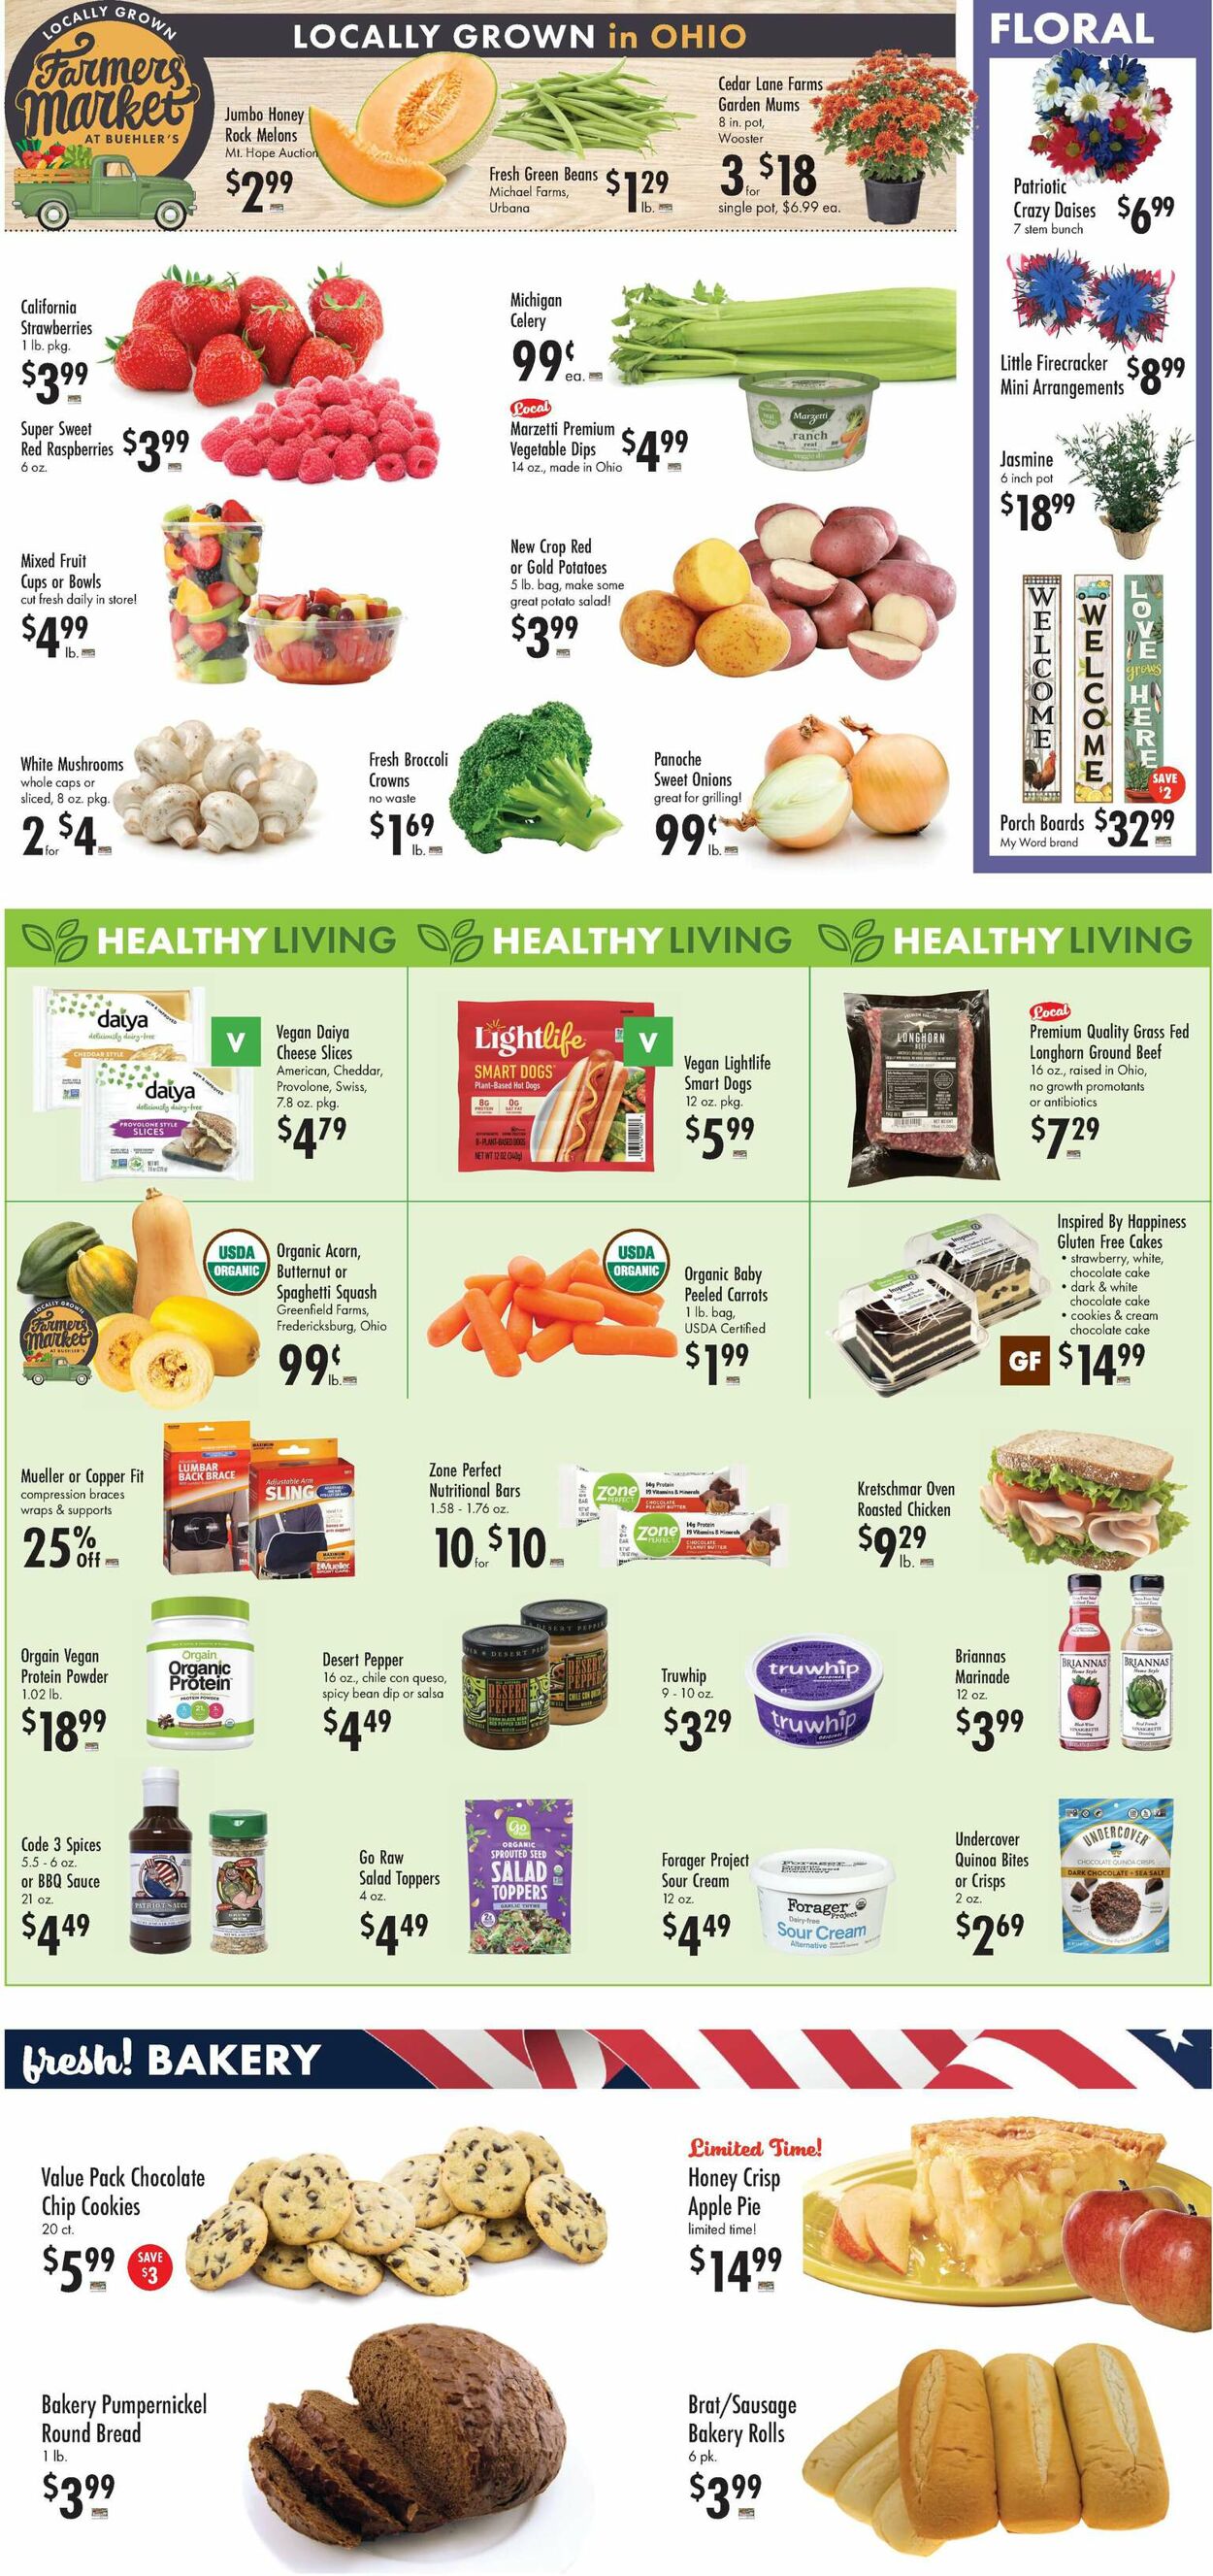 Buehler's Fresh Foods Ad from 08/30/2023